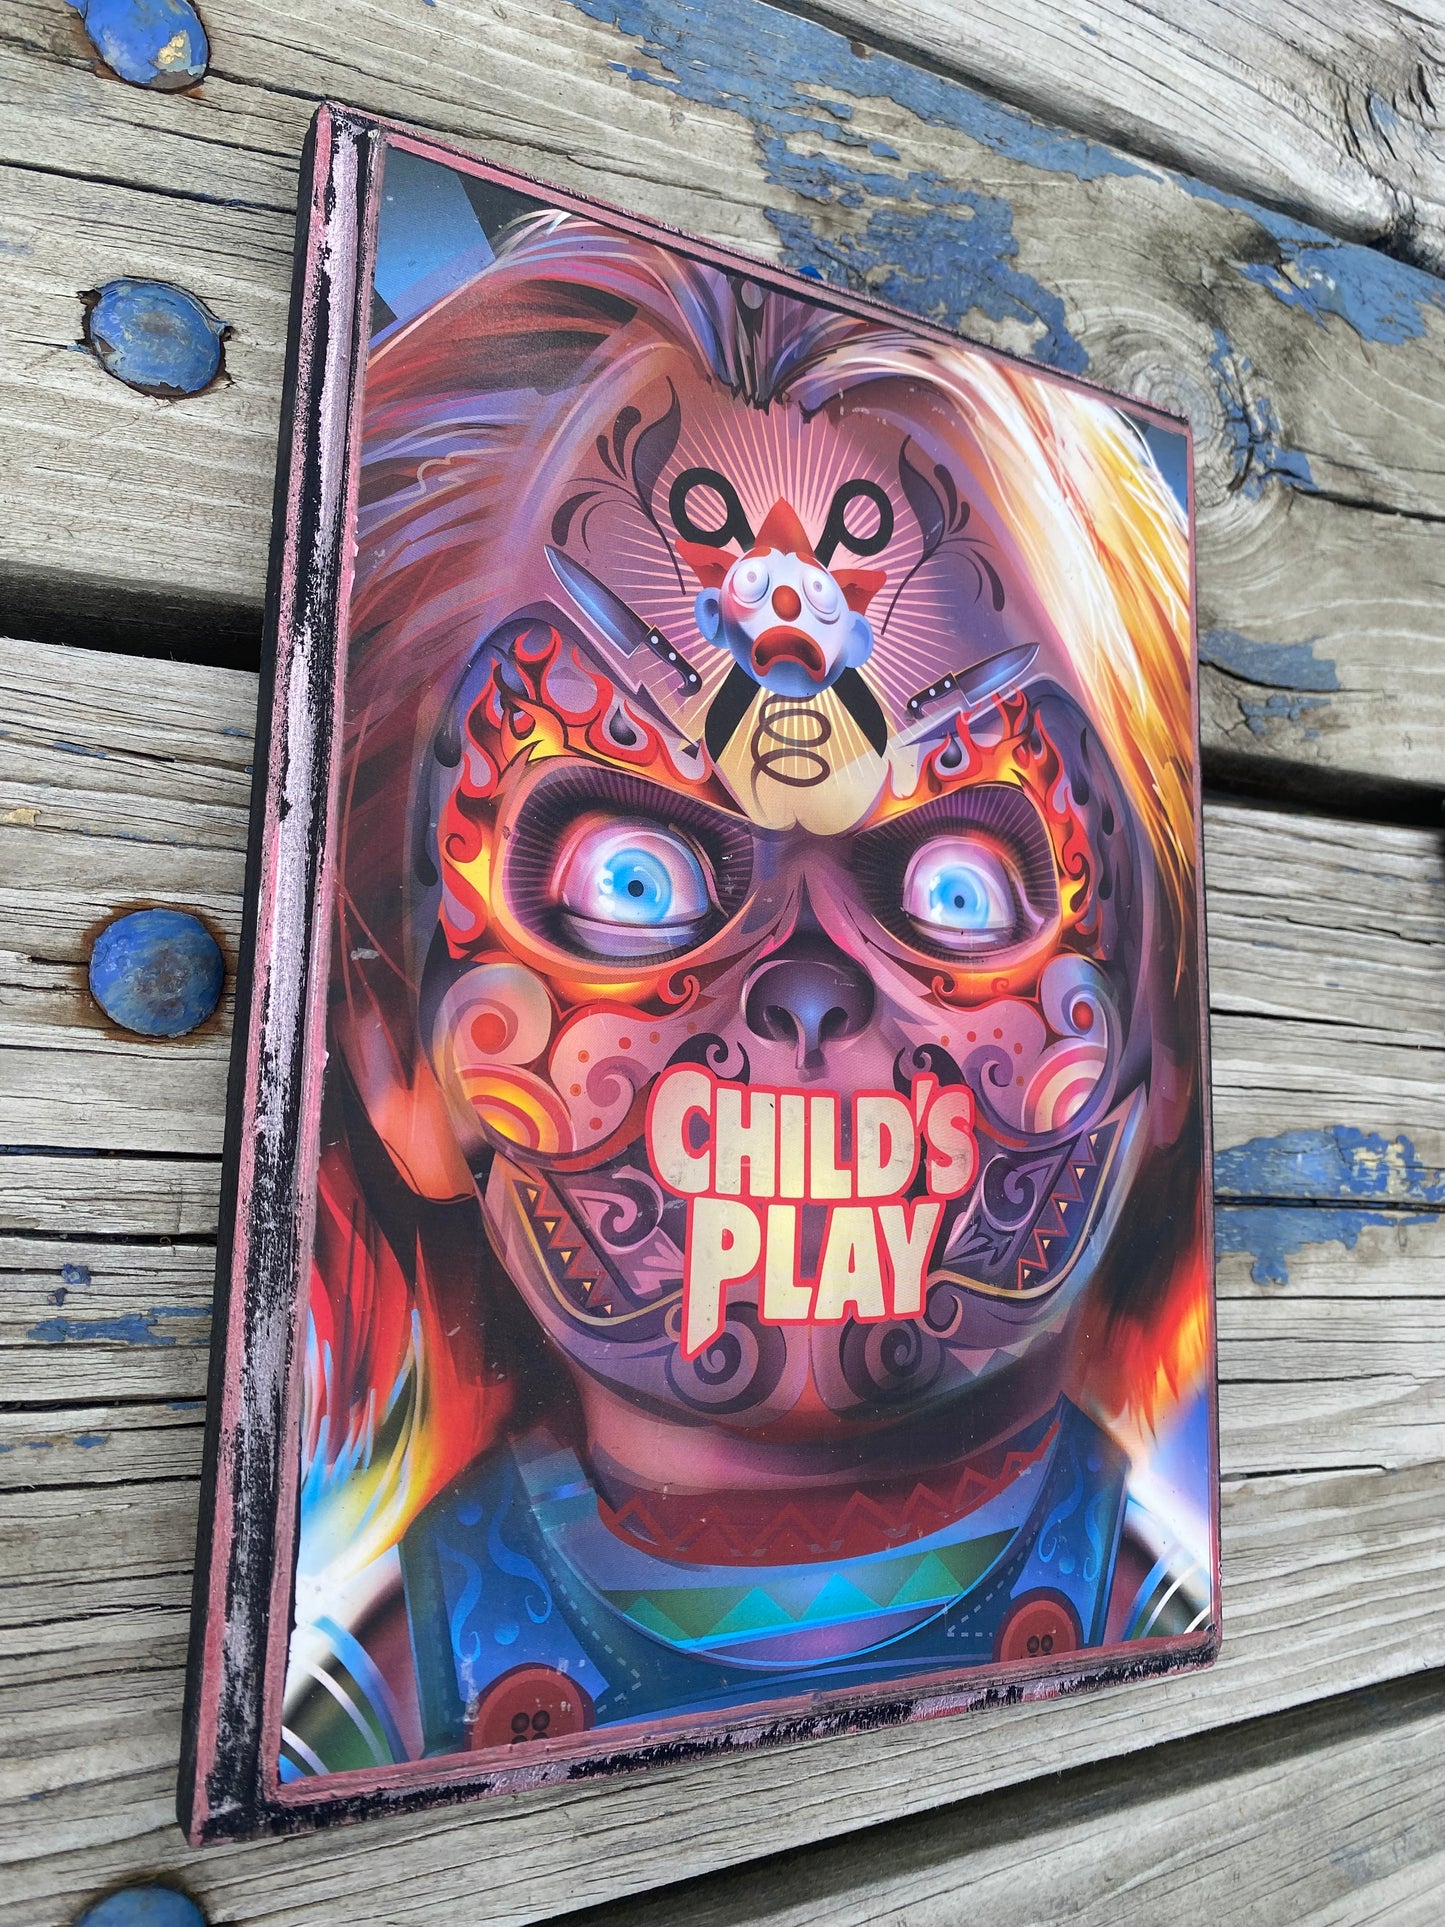 Child’s play it handmade solid wood framed movie mini poster art plaque 9 x 7 set of two ￼